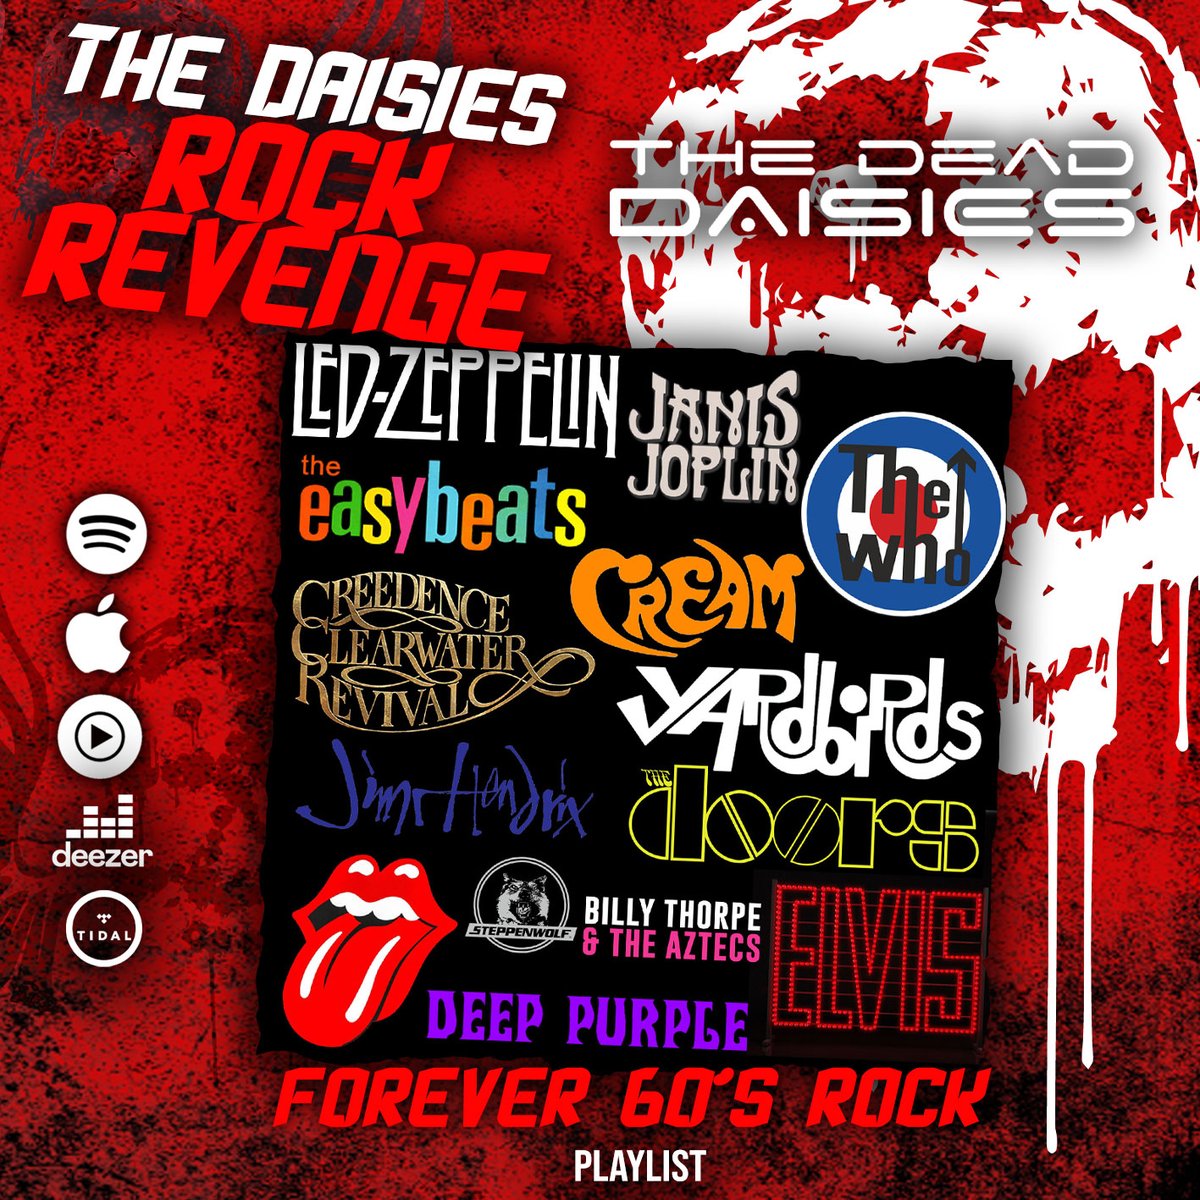 In the 60’s there were some incredible artists & songs written! Over the decades so many bands have been influenced by them! 🚀🚀
Enjoy streaming these tracks and have a rockin' weekend !🤘🤘
thedeaddaisies.com/daisies-rock-r…

#TheDeadDaisies #TheDaisiesRockRevenge #Forever60s #Playlist